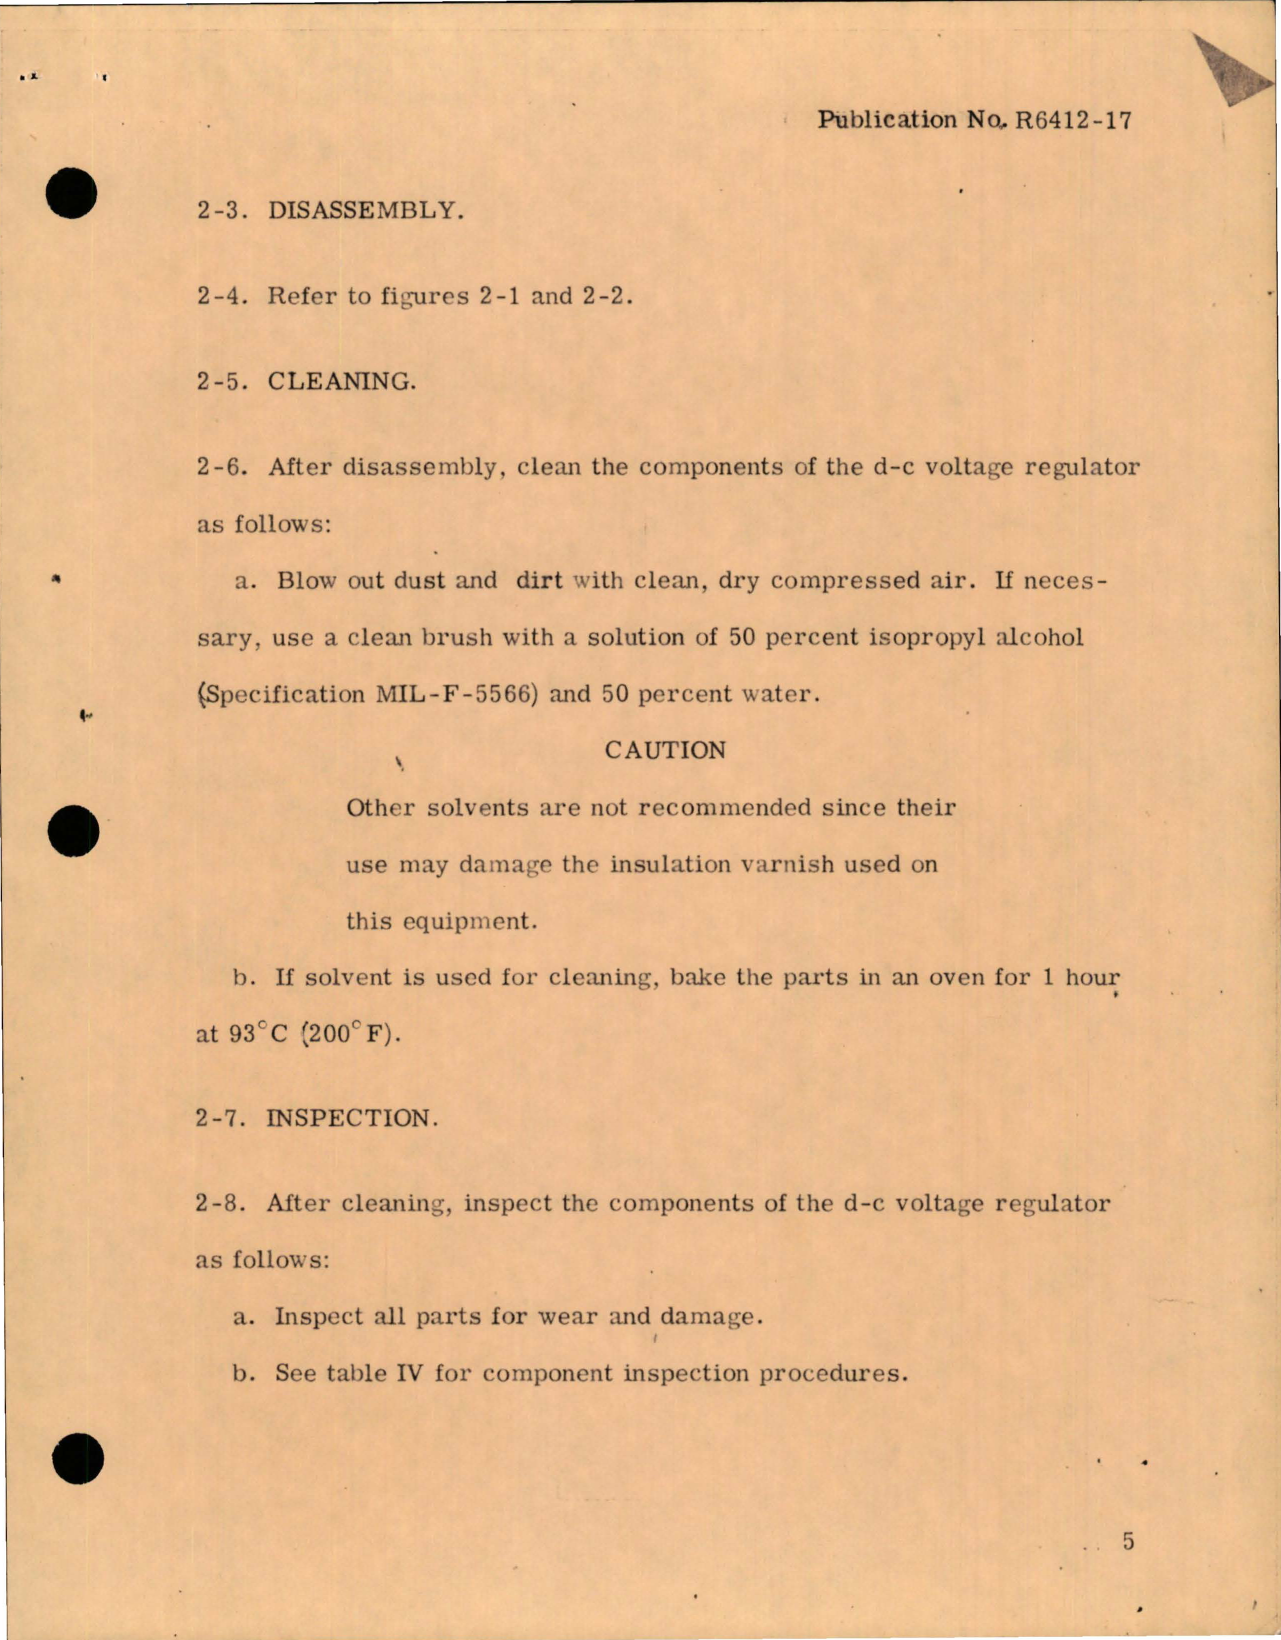 Sample page 9 from AirCorps Library document: Overhaul Instructions with Parts List for D-C Voltage Regulator - Type 24B24-1-A and 24B24-1-B